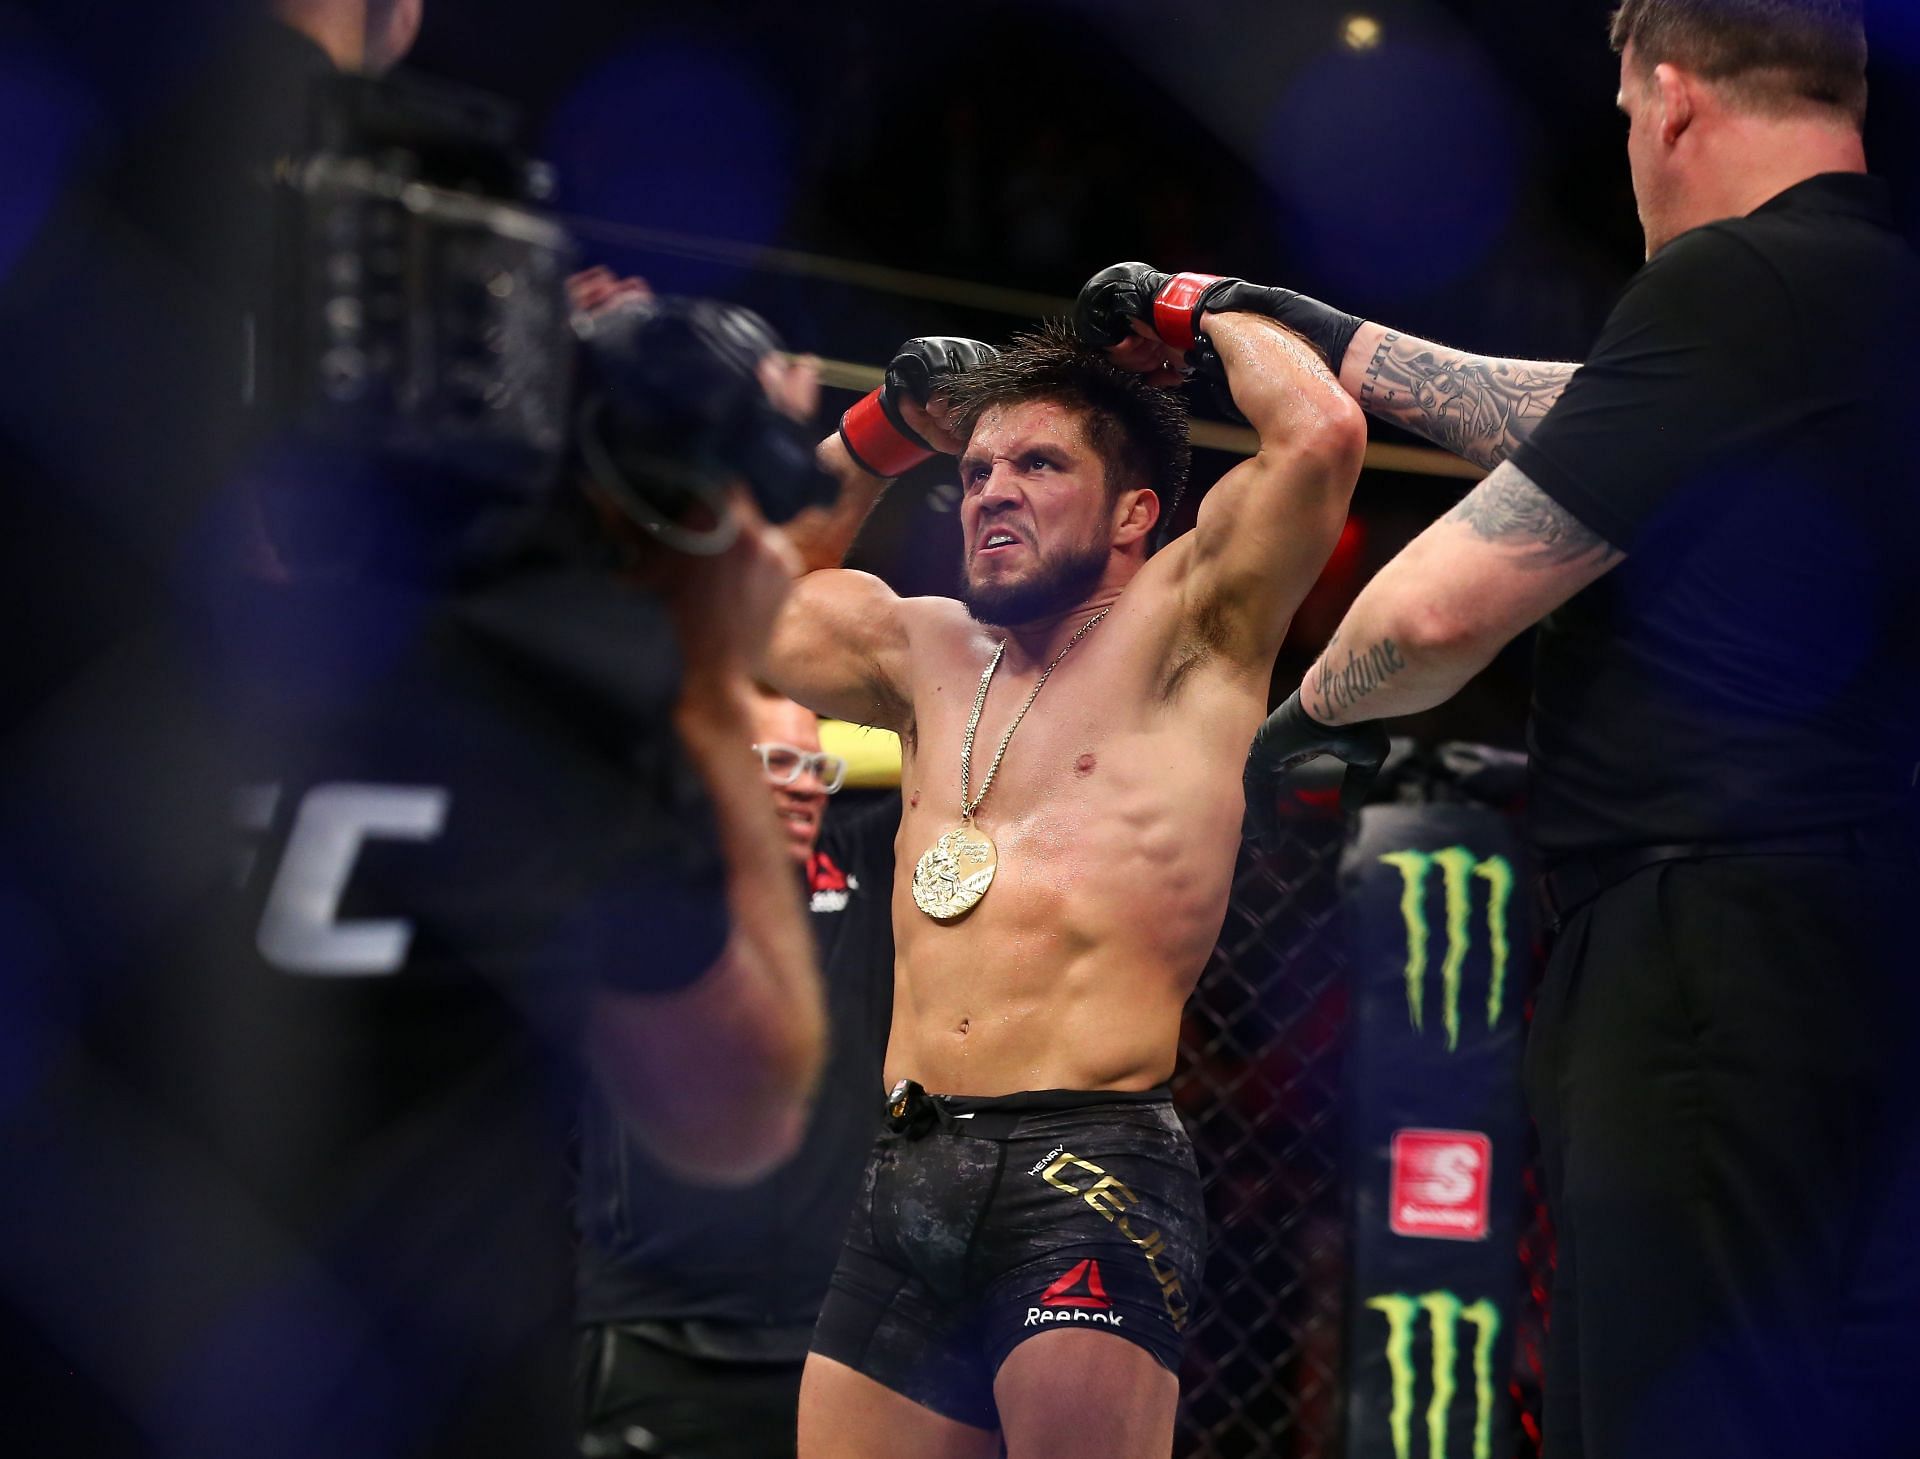 Cejudo last fought Dominick Cruz in May of last year